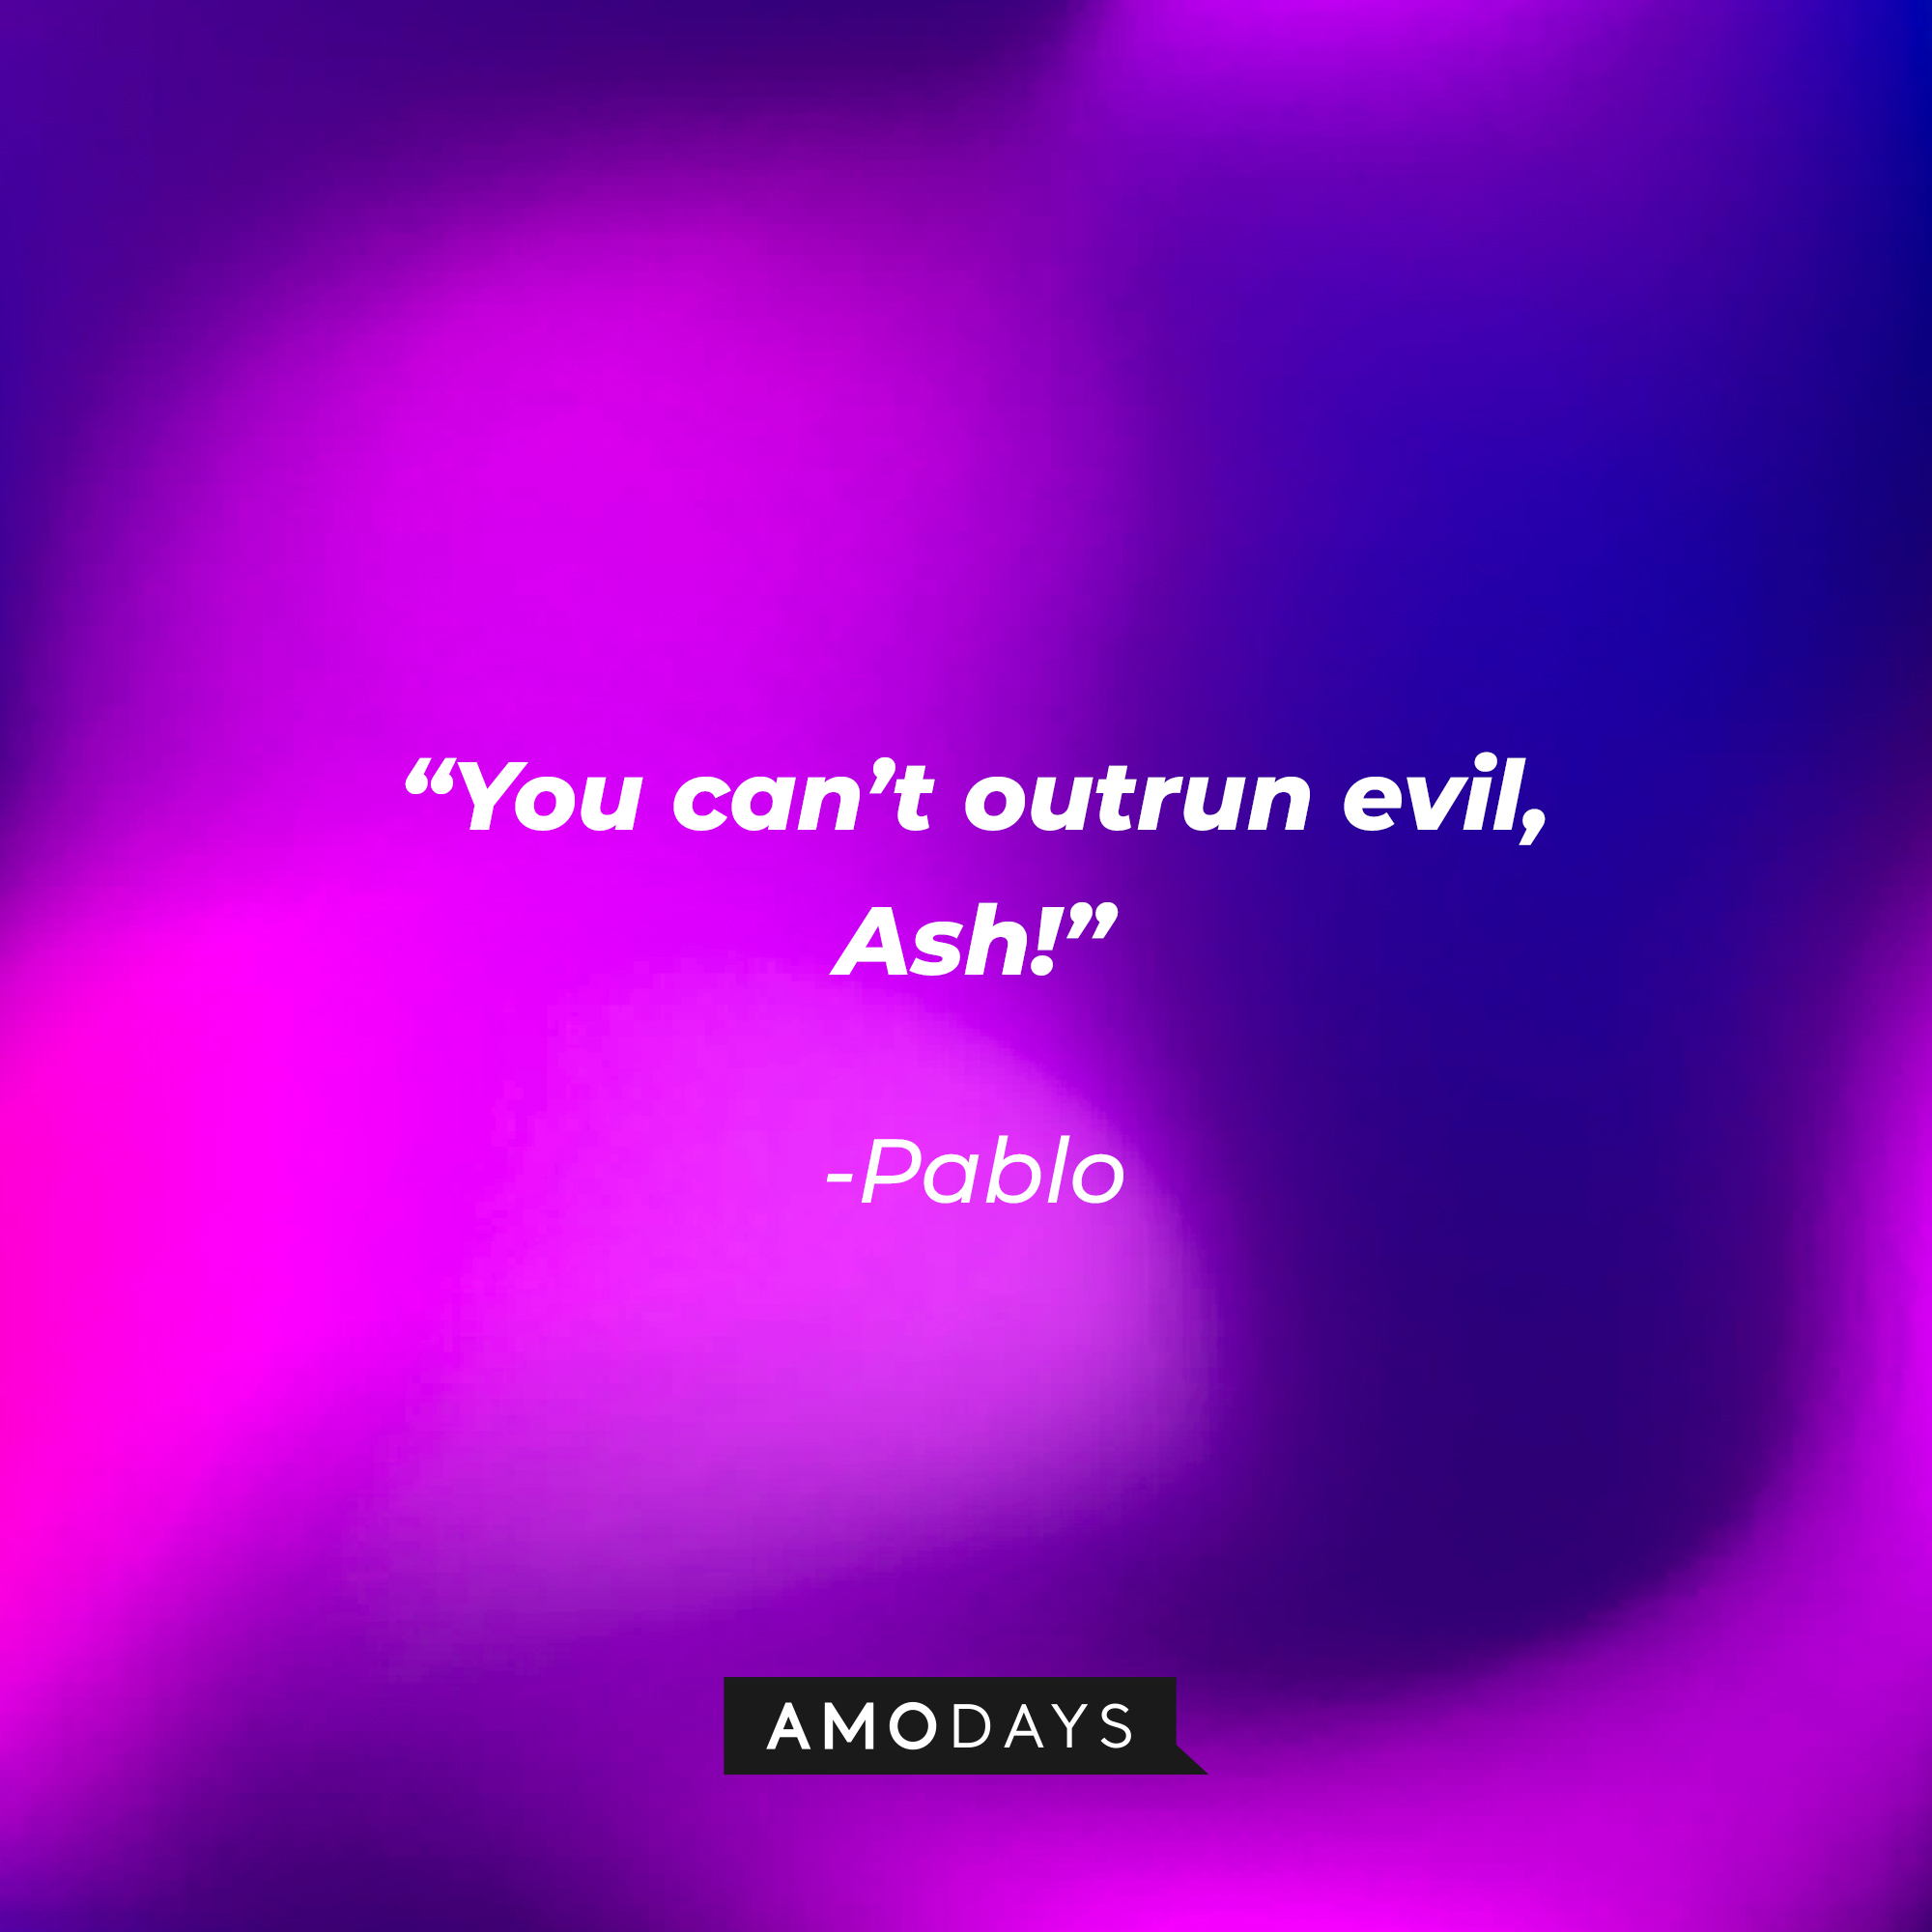 Ash Williams' quote: “You can’t outrun evil, Ash!” | Source: Amodays